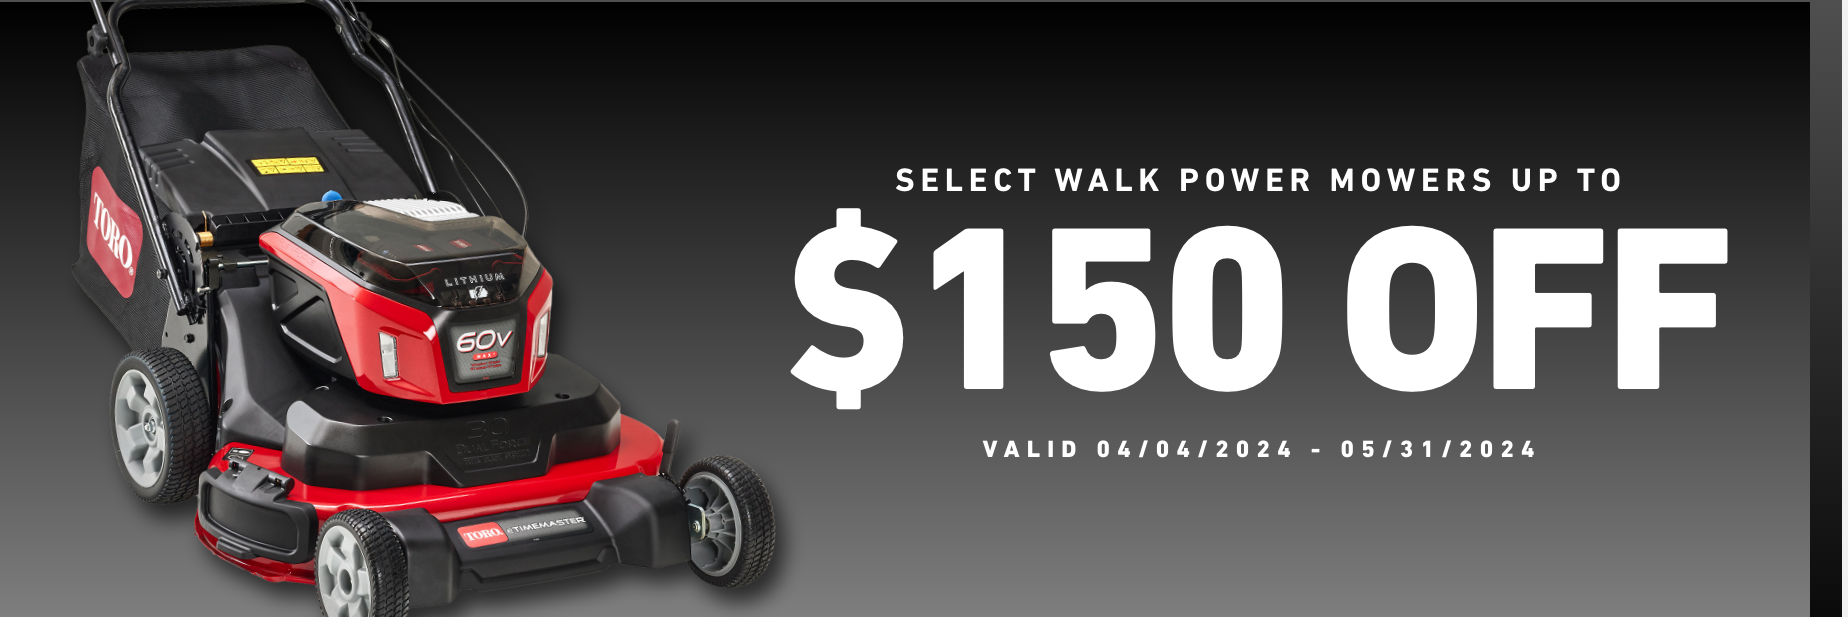 A toro lawn mower is on sale for $ 500 off